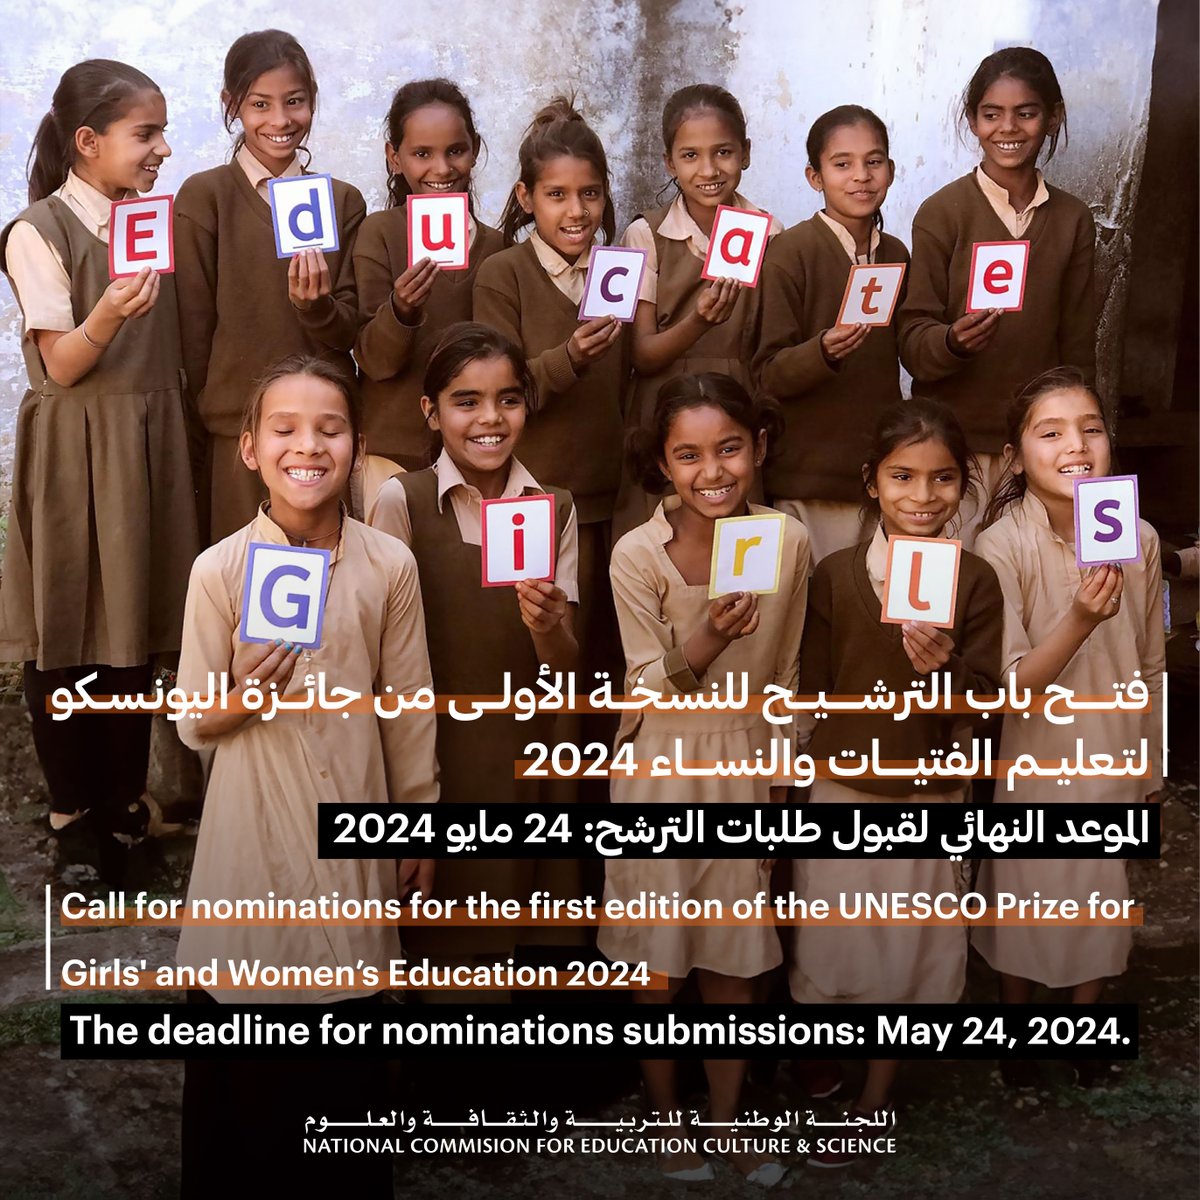 The UAE National Commission for Education, Culture, and Science announced the opening of applications for the first edition of the UNESCO Prize for Girls’ and Women’s Education. For more information, visit: unesco.org/en/prizes/girl…